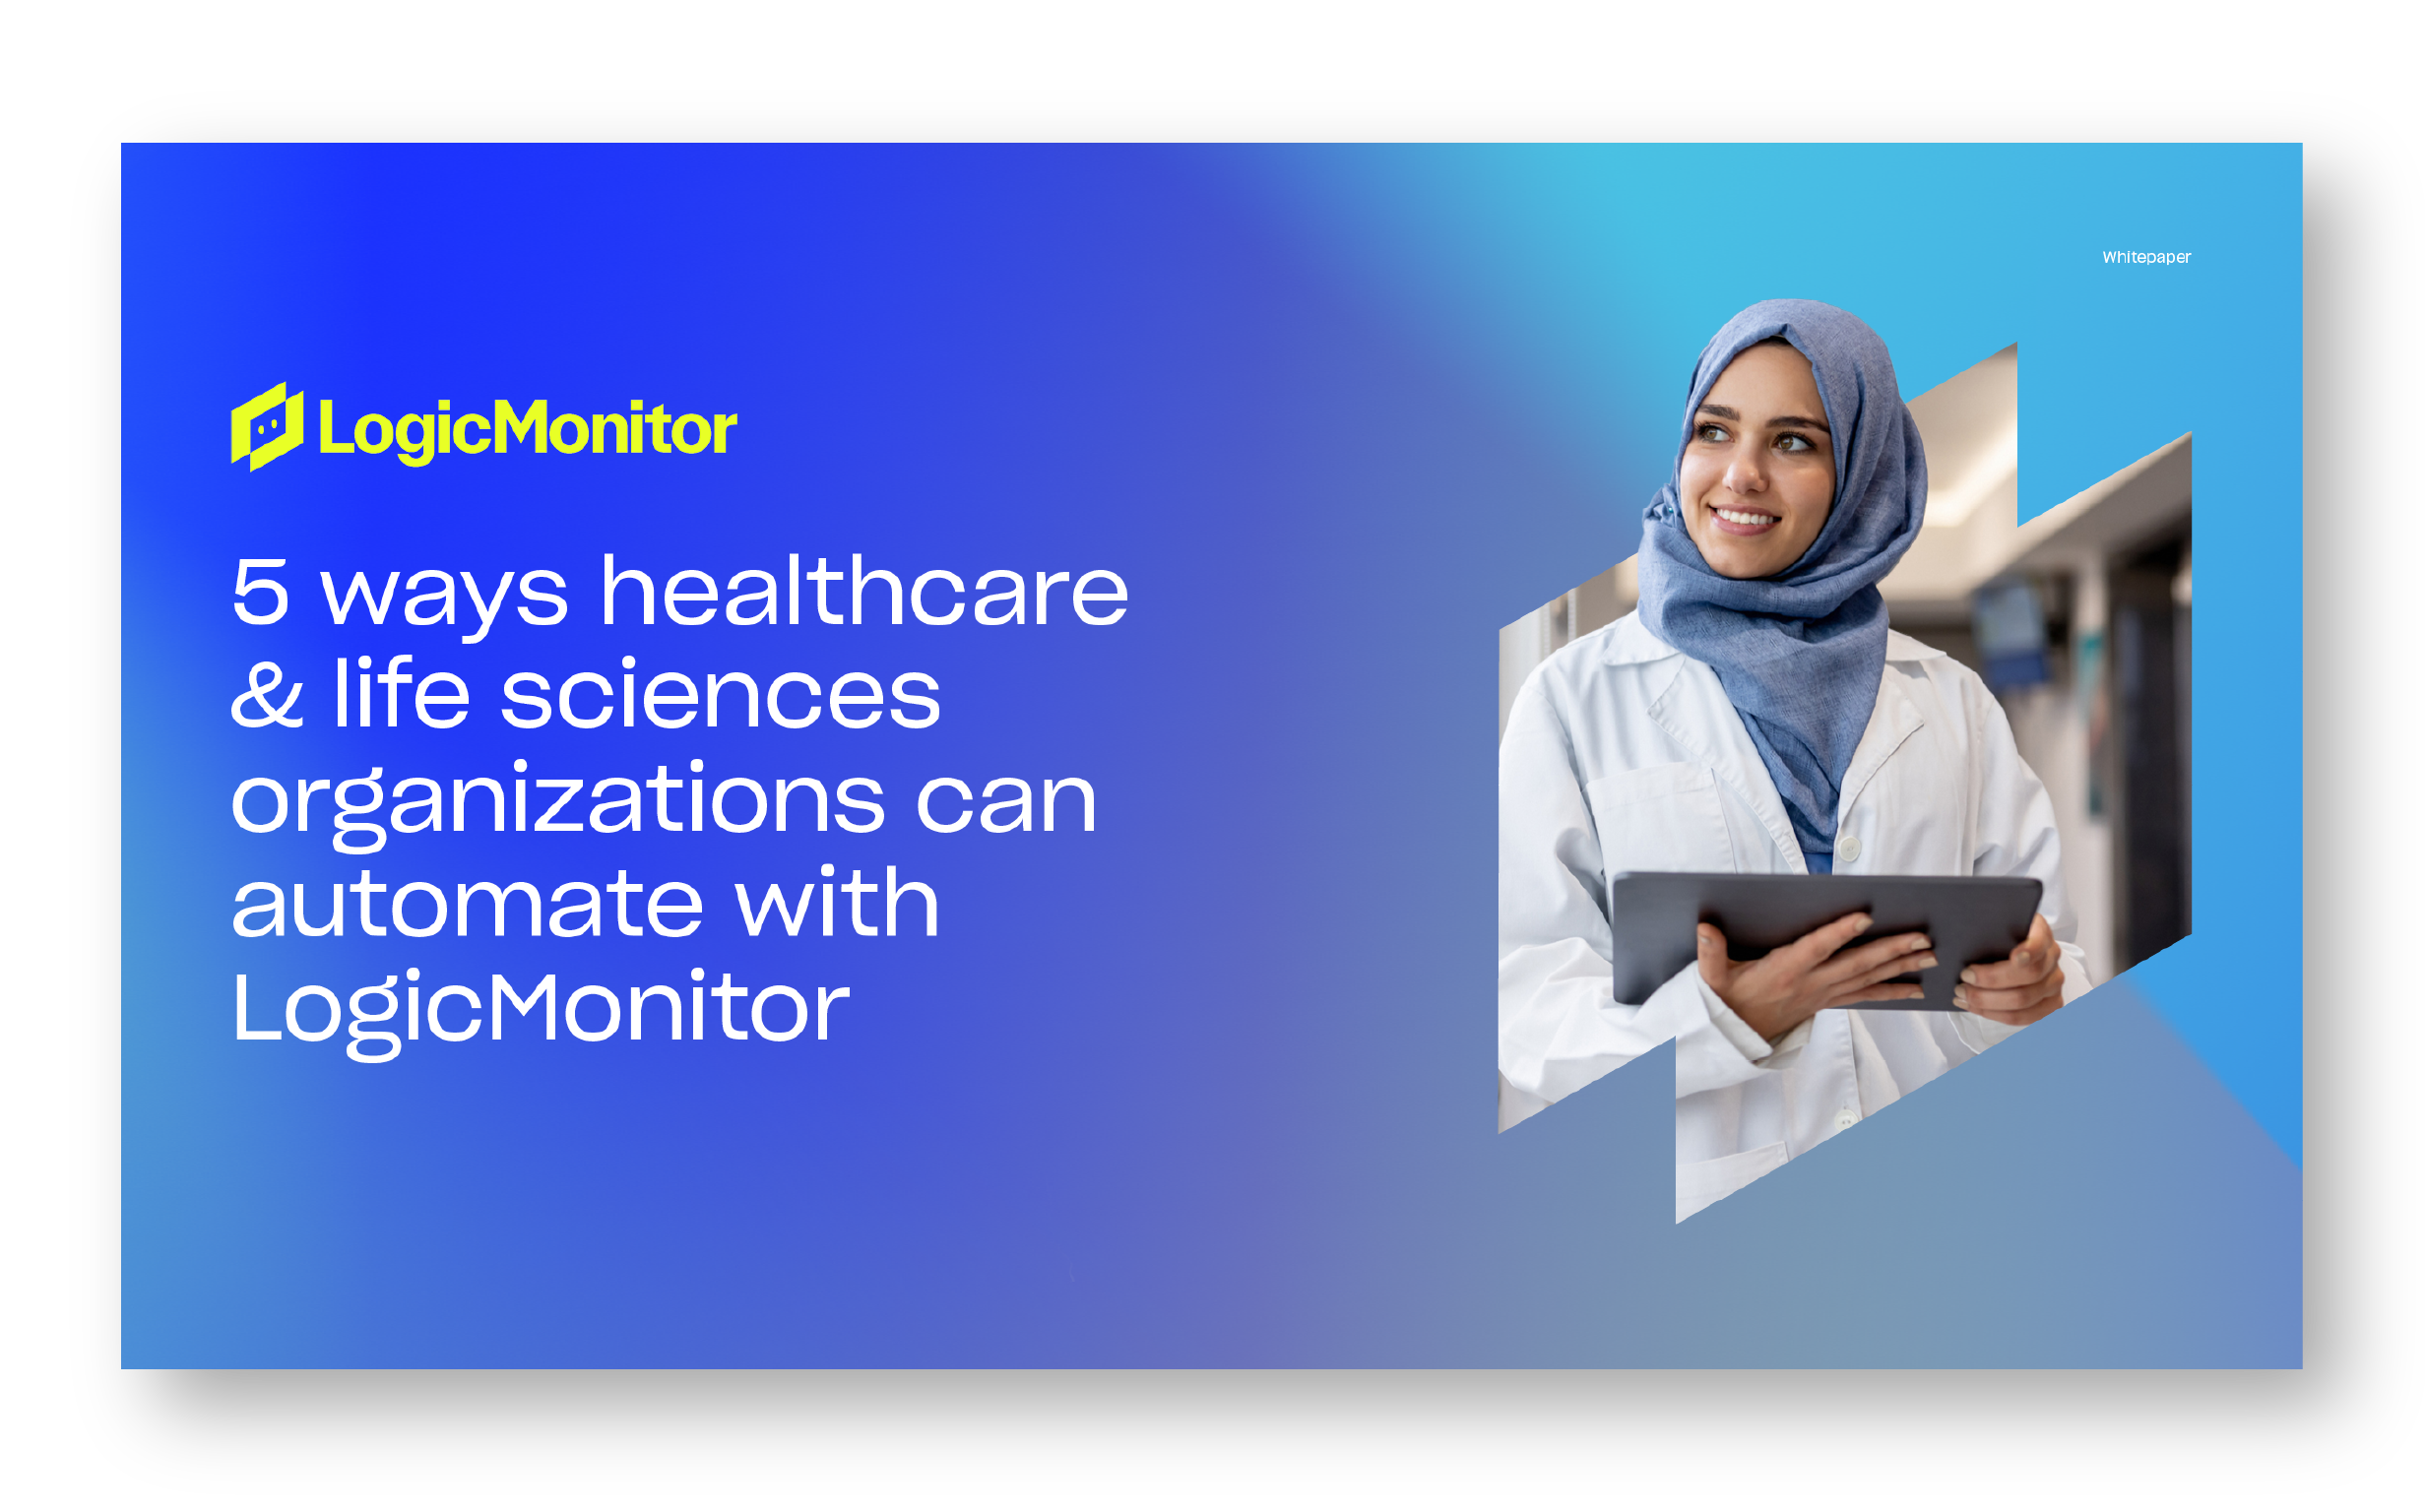 5 ways healthcare & life sciences companies can automate with LogicMonitor